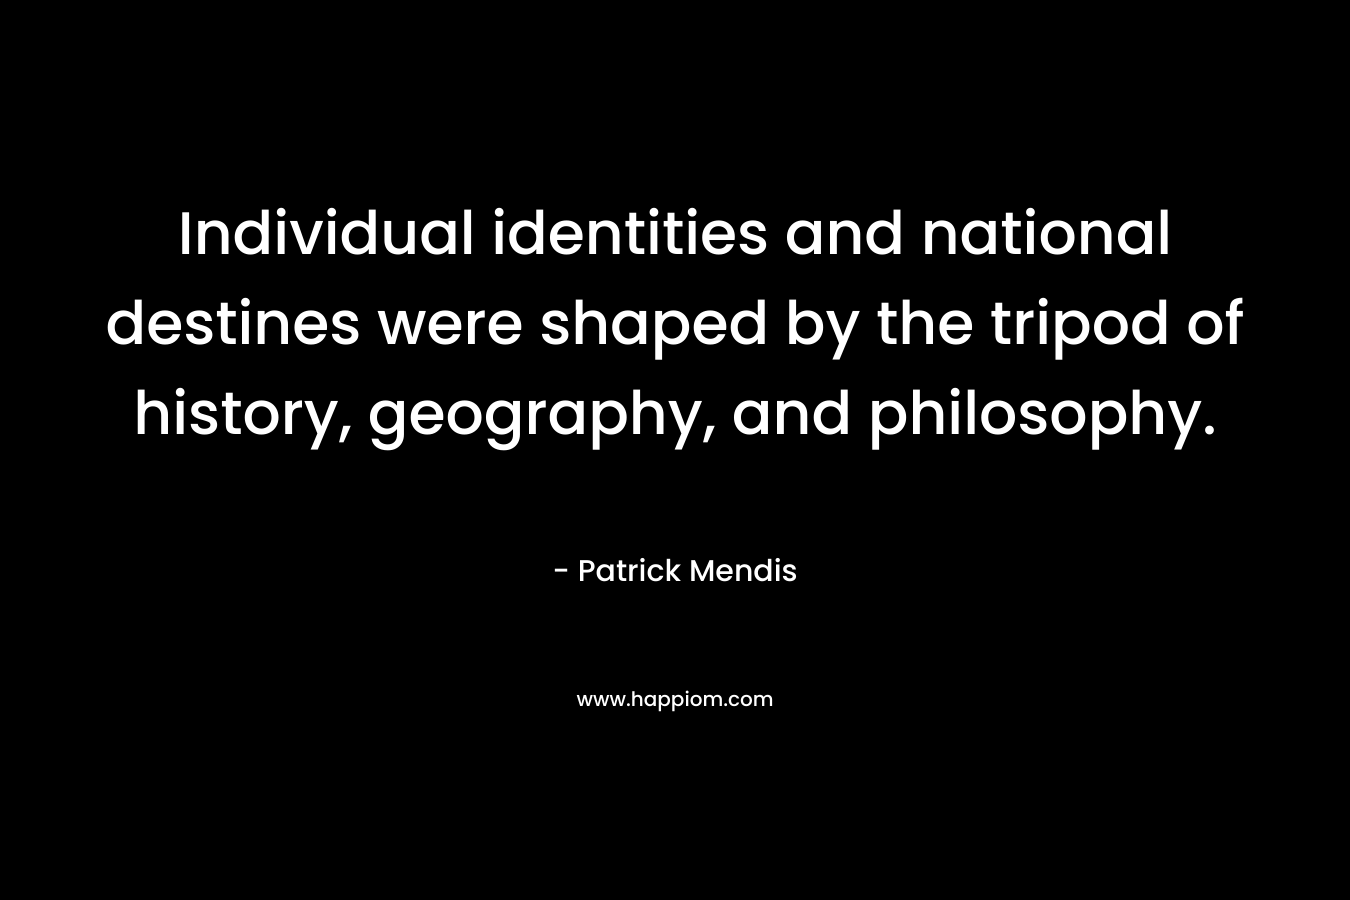 Individual identities and national destines were shaped by the tripod of history, geography, and philosophy. – Patrick Mendis